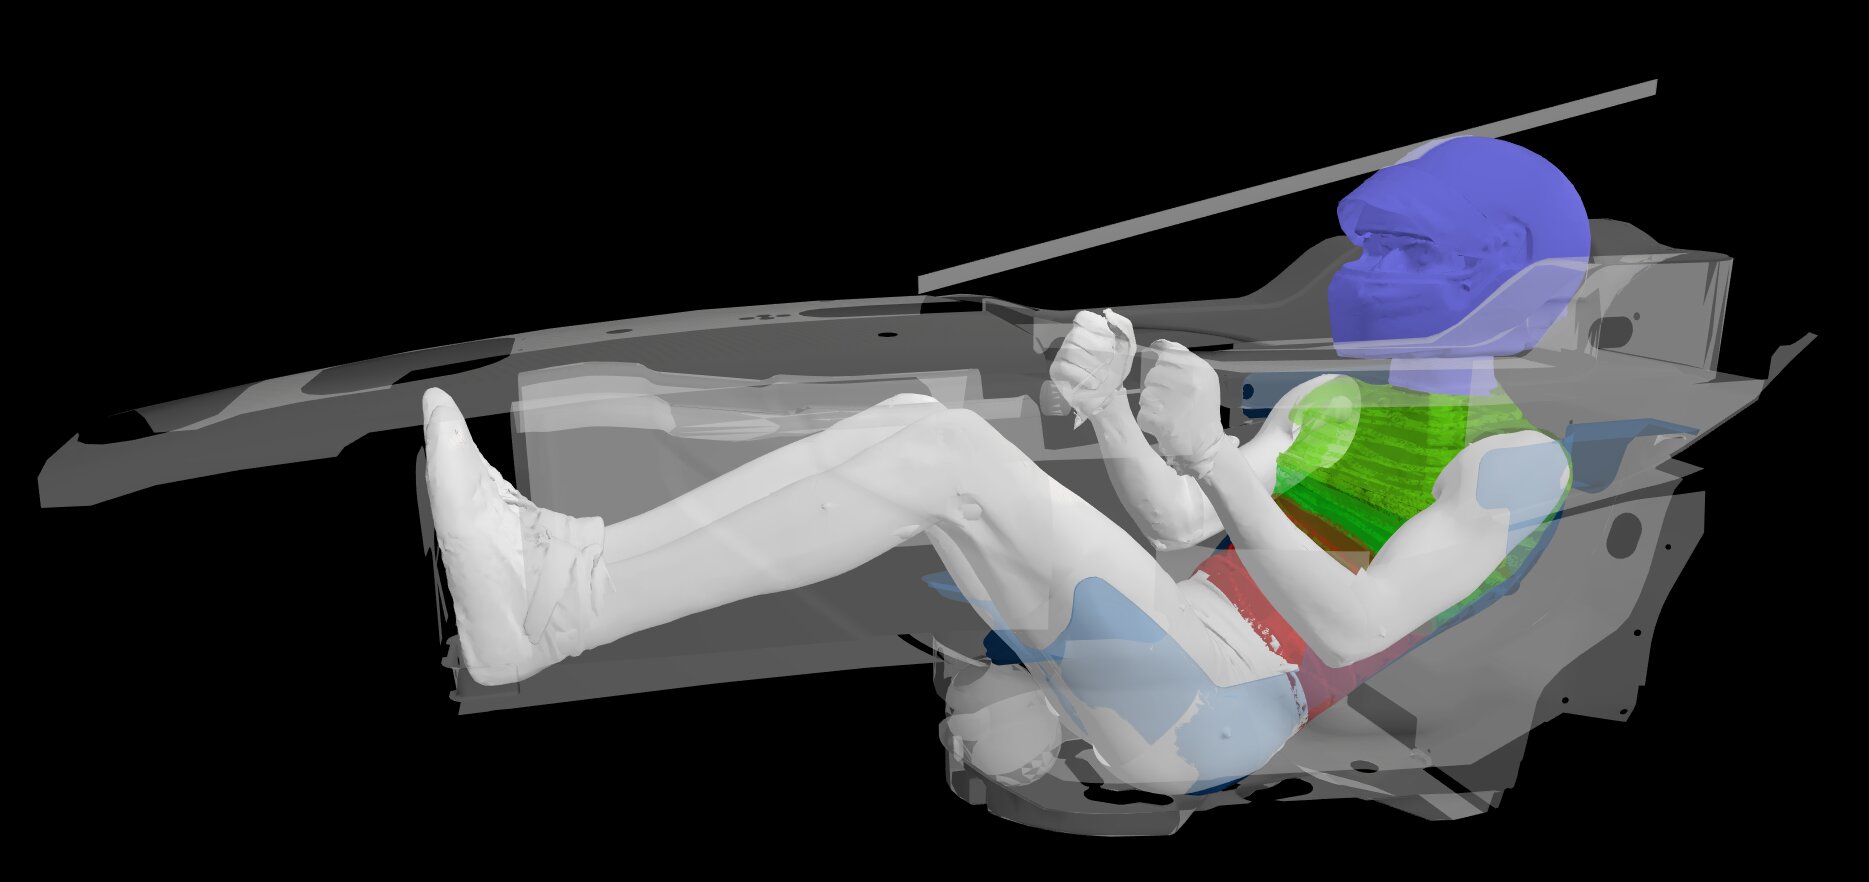 F1 driver seat ‘avatar’ has potential to improve comfort and performance